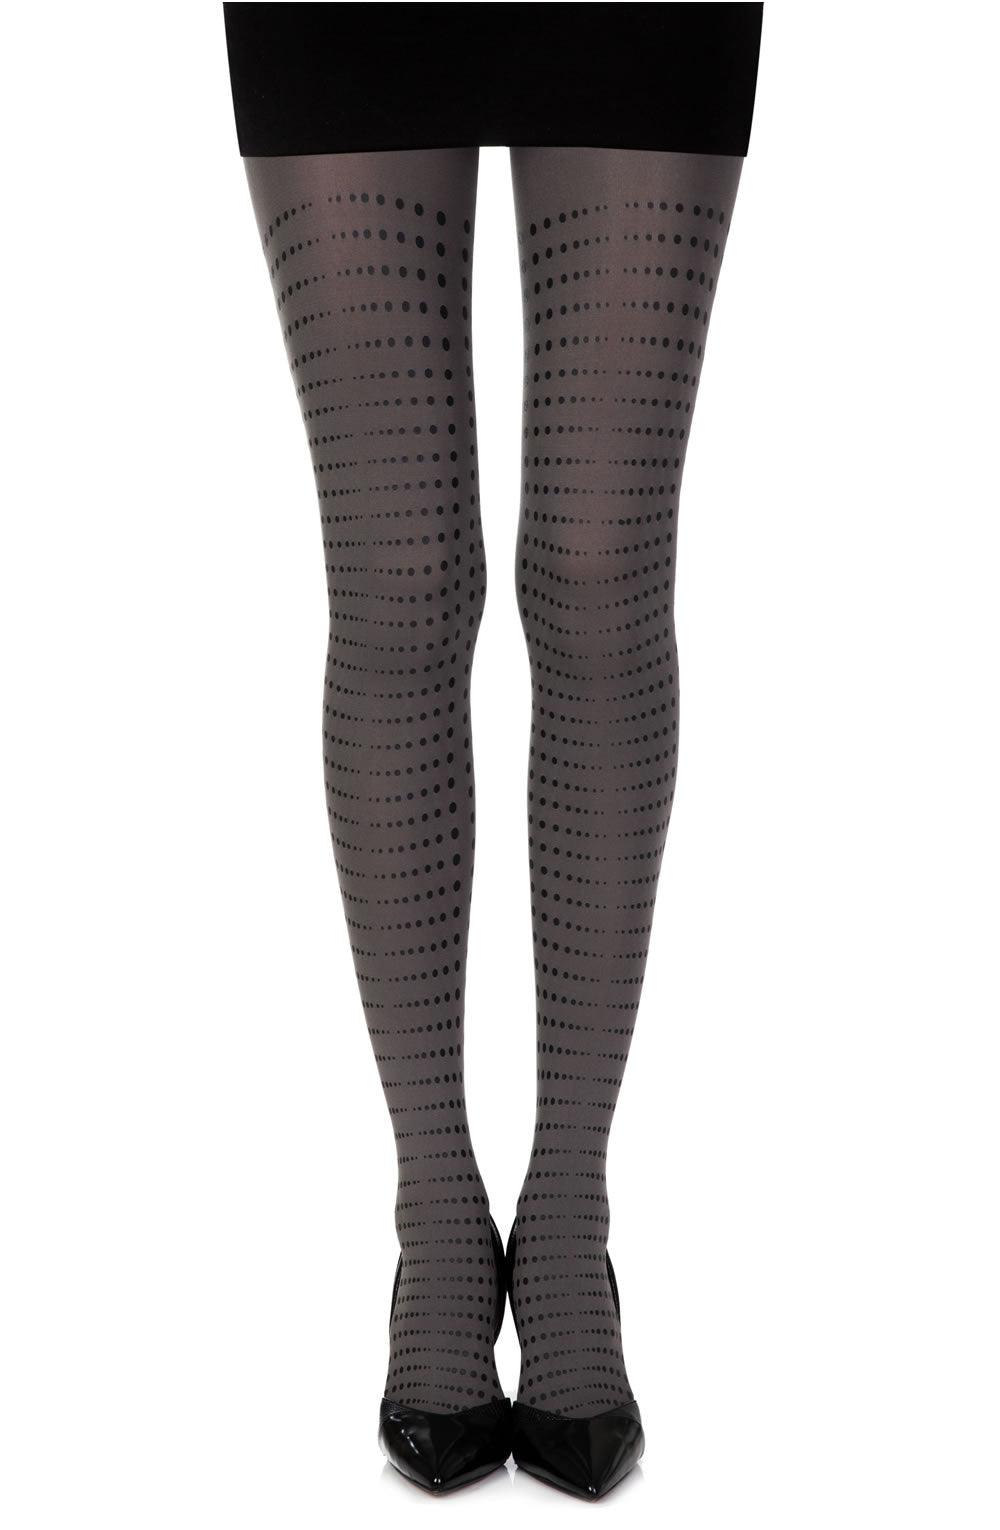 Zohara "Matching Point" Grey Print Tights - Sydney Rose Lingerie 